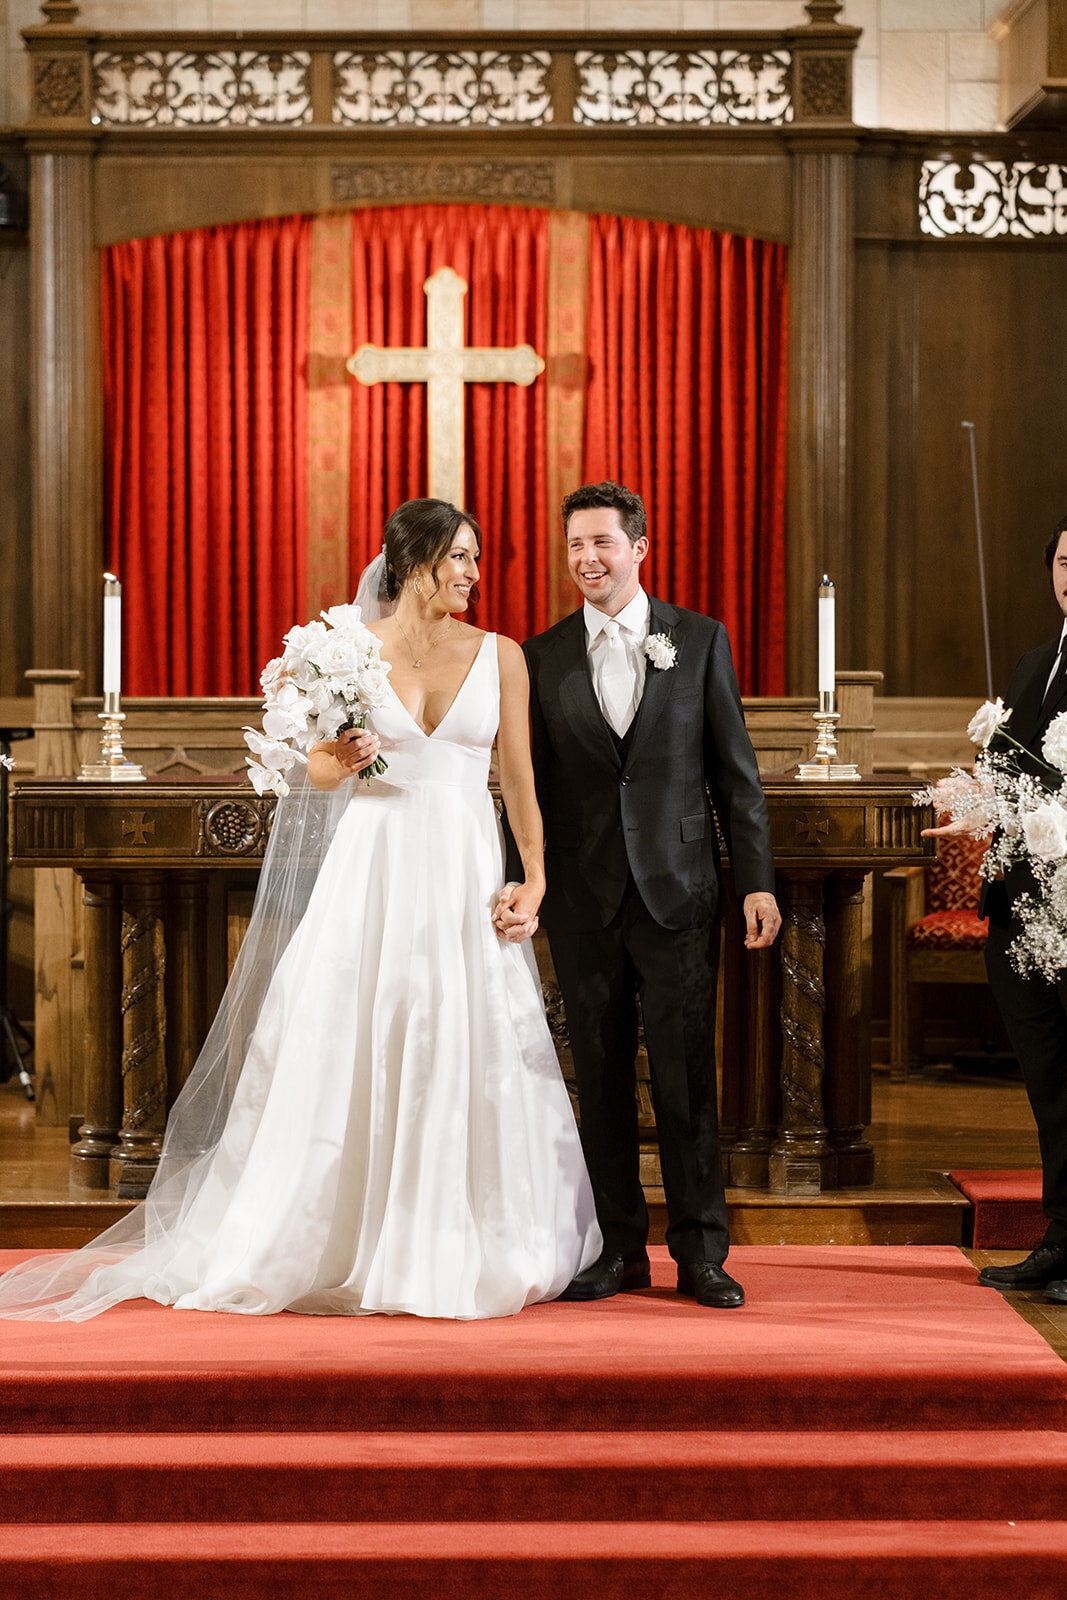 Kylie and Jack at The Grand Hall - Kansas City Wedding Photograpy - Nick and Lexie Photo Film-690